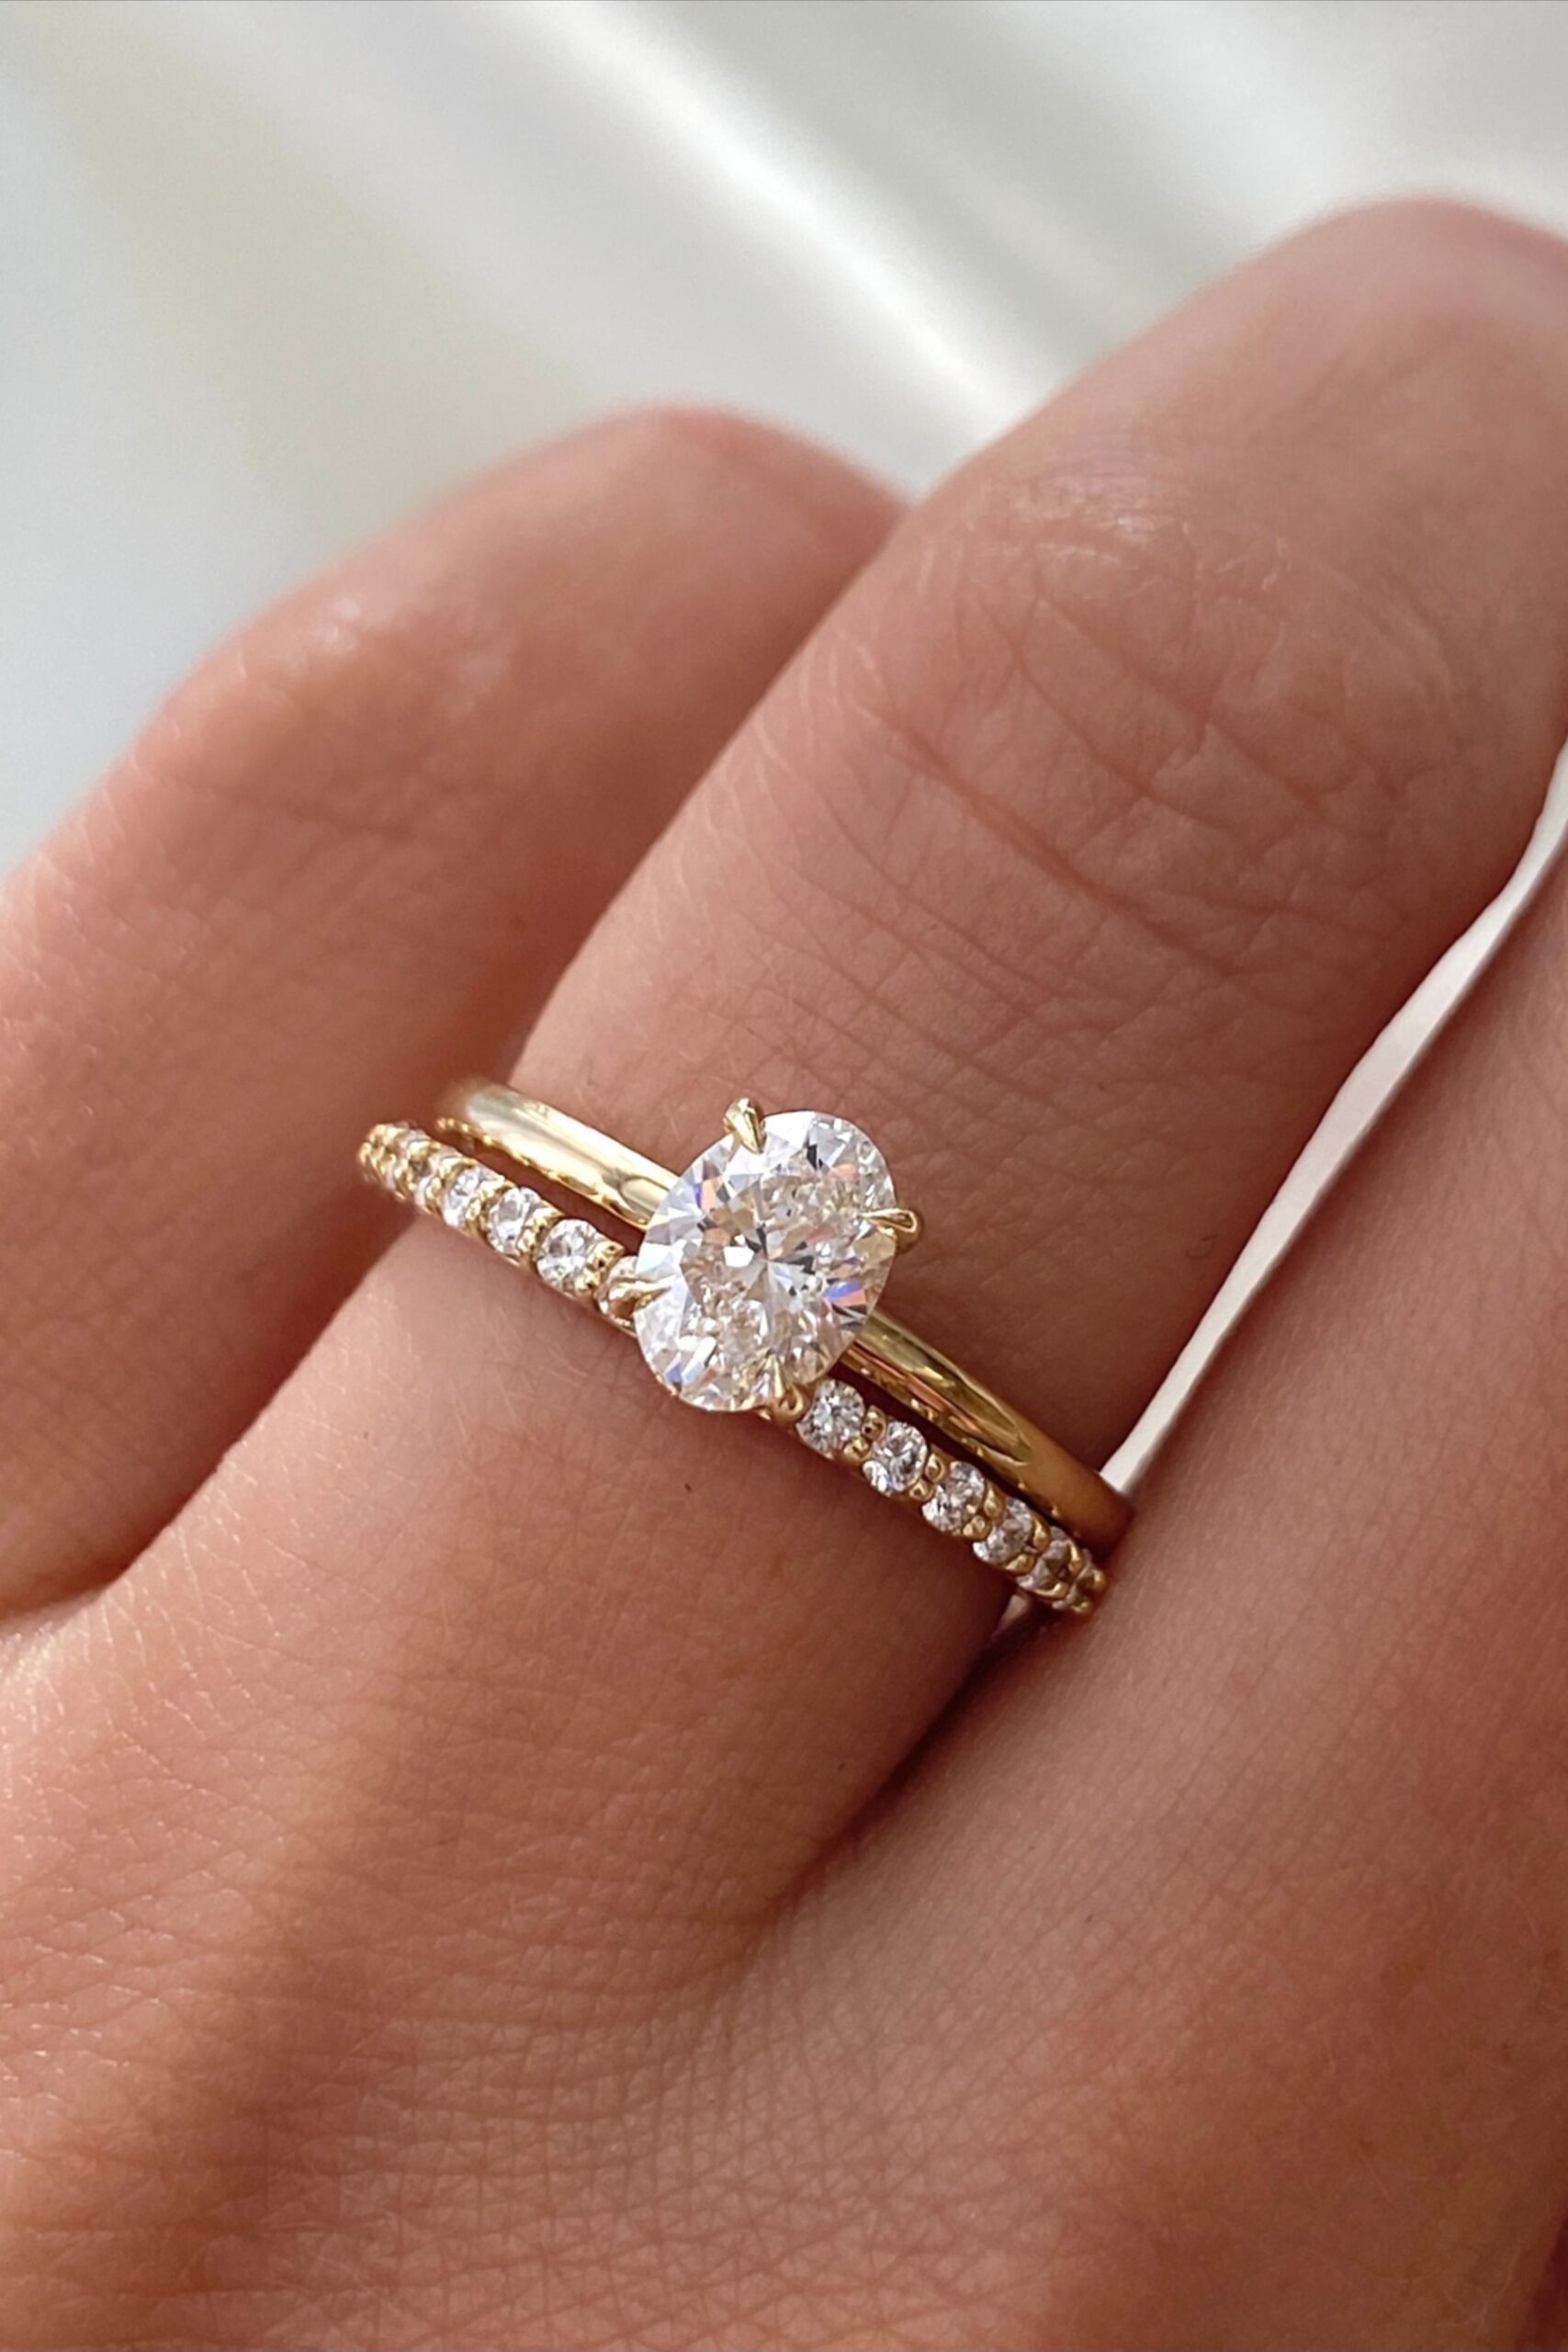 Choosing the Perfect Wedding Ring: A
Guide for Couples